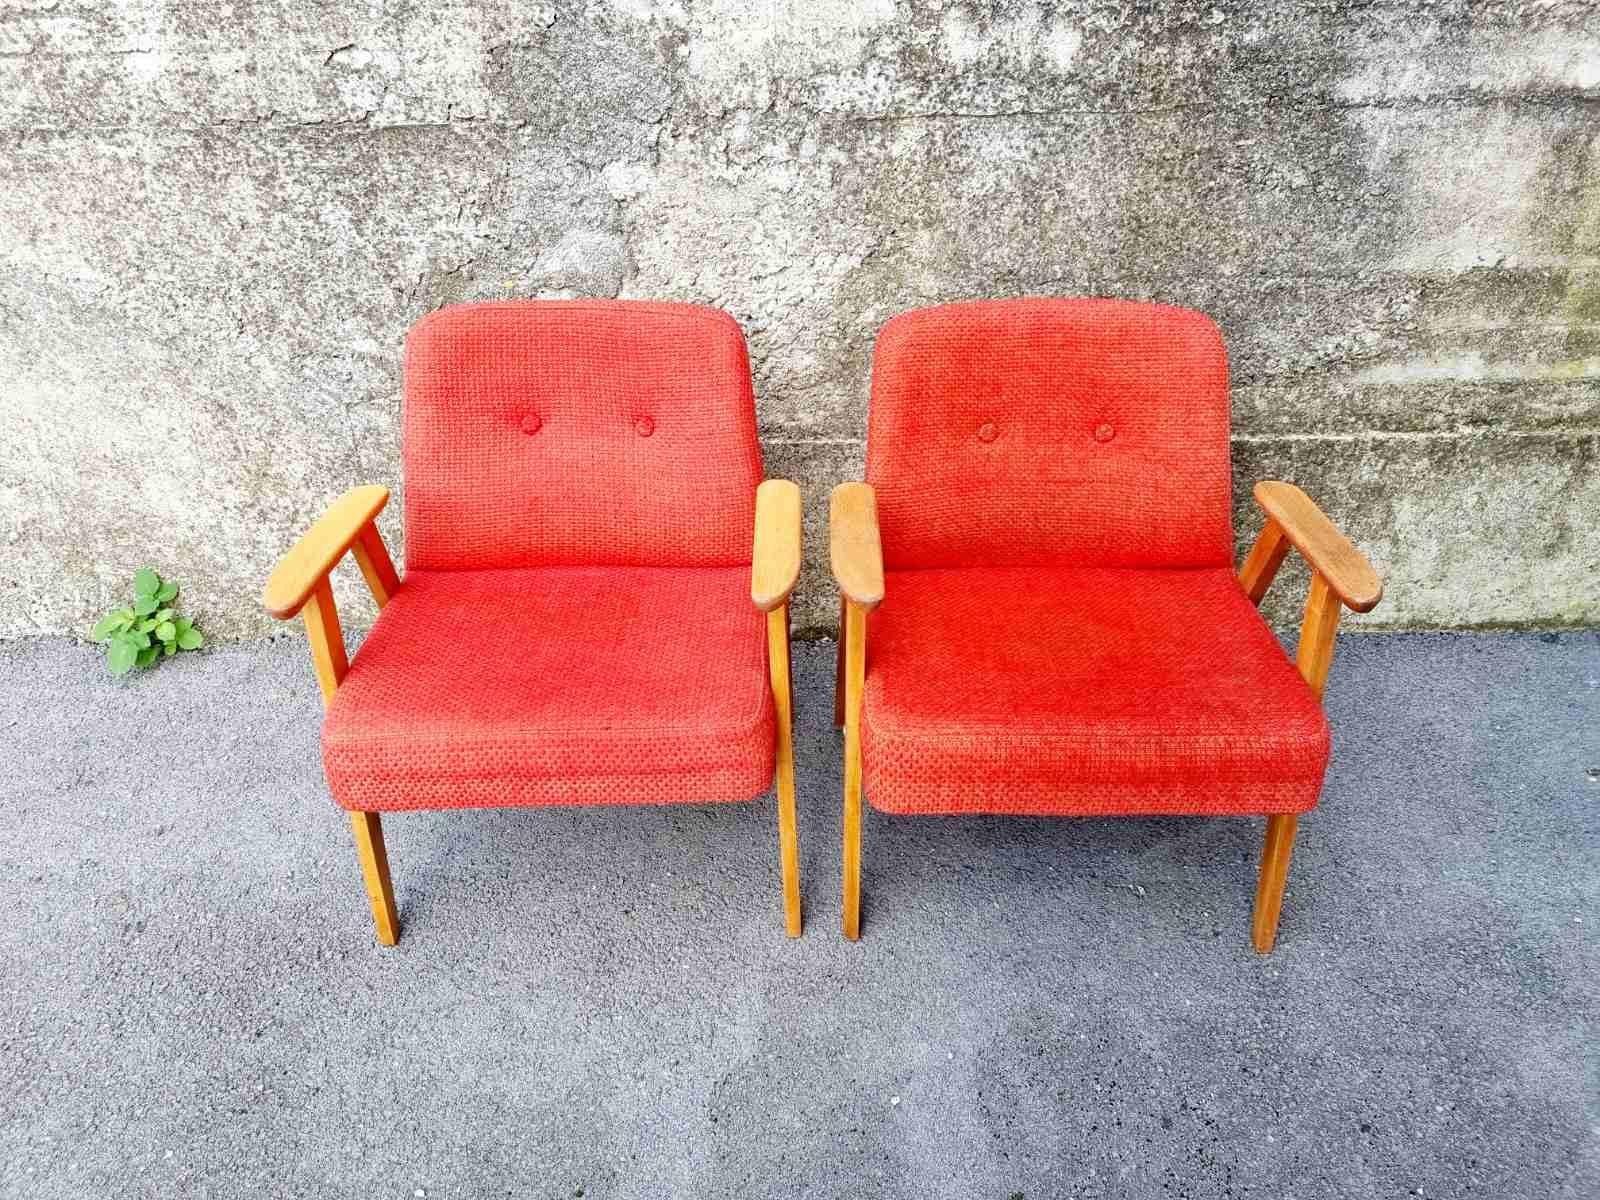 Pair of Midcentury Polish Armchairs, Model 366, Design by Jozef Chierowski 60s For Sale 4